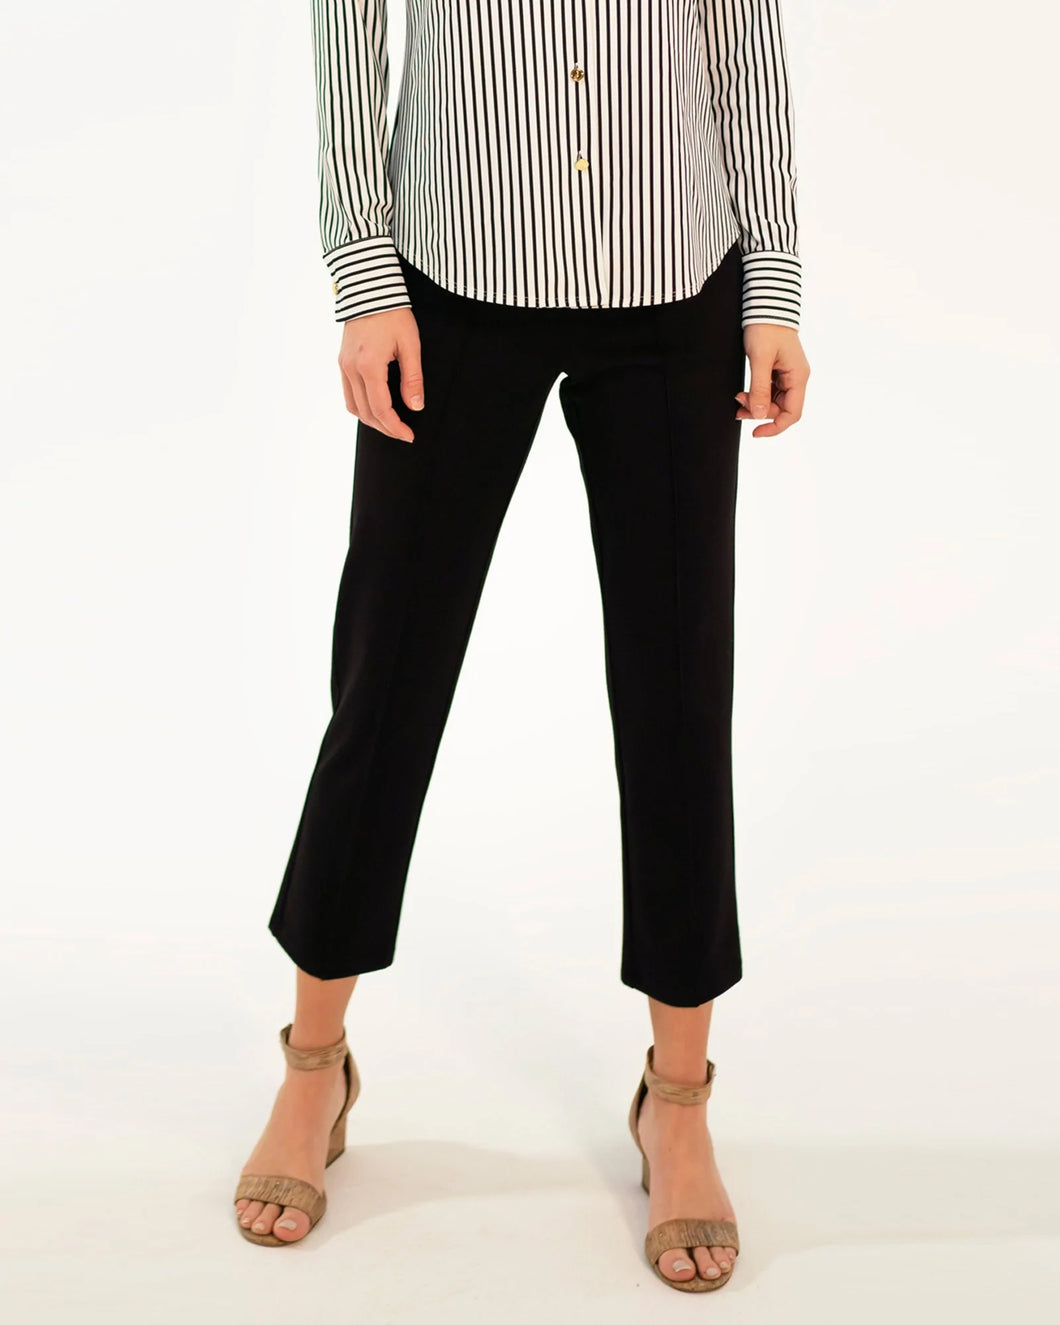 Tobi Firm Finish Ponte Pant in Black by Jude Connally